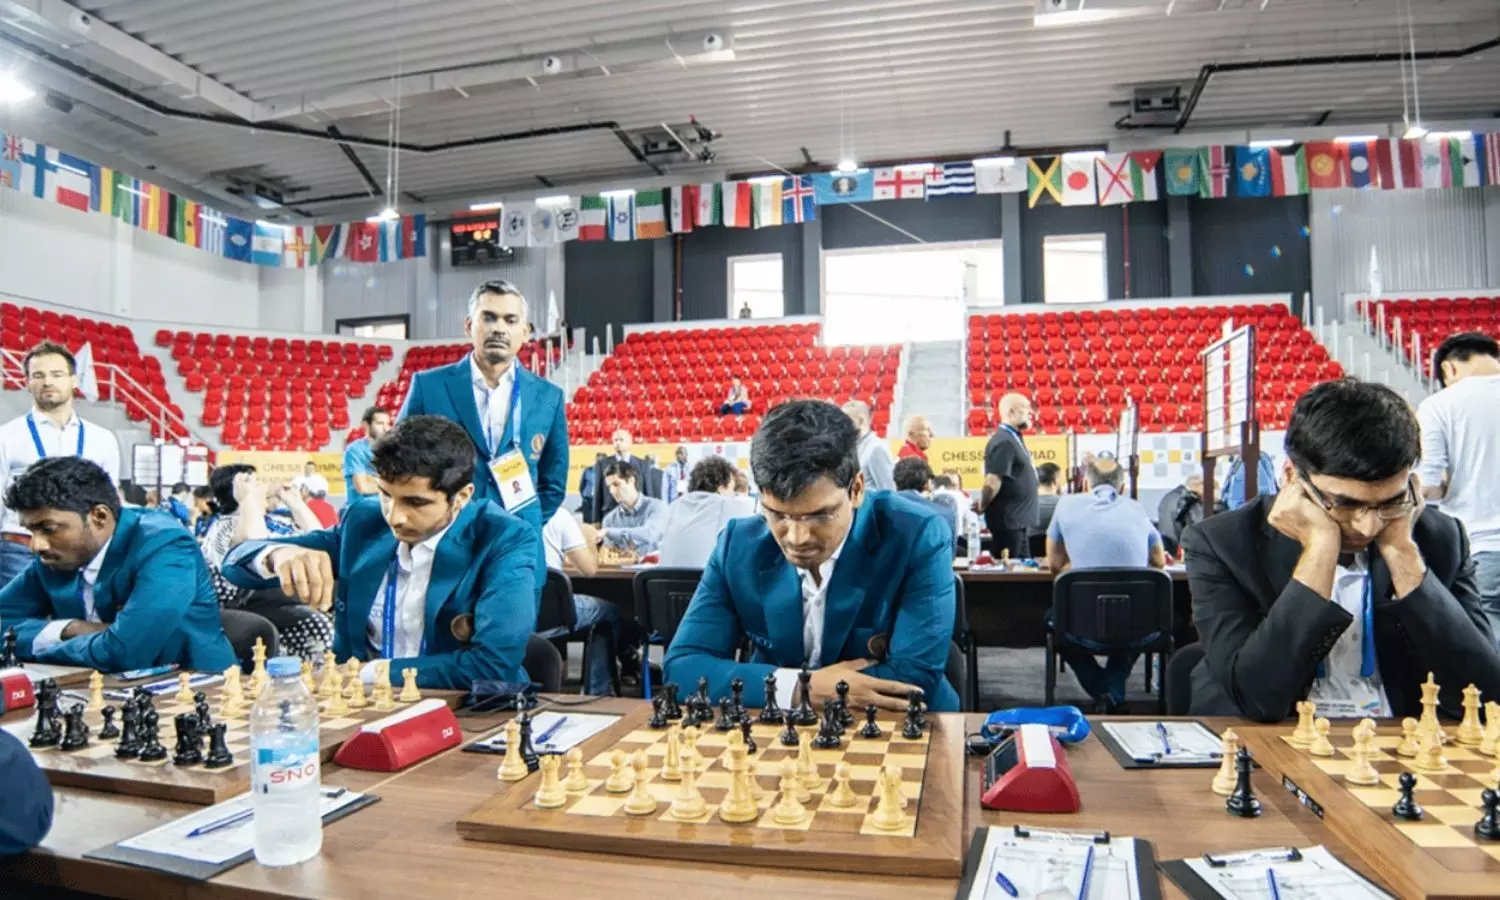 FIDE Chess Olympiad 2022 will be held in Chennai